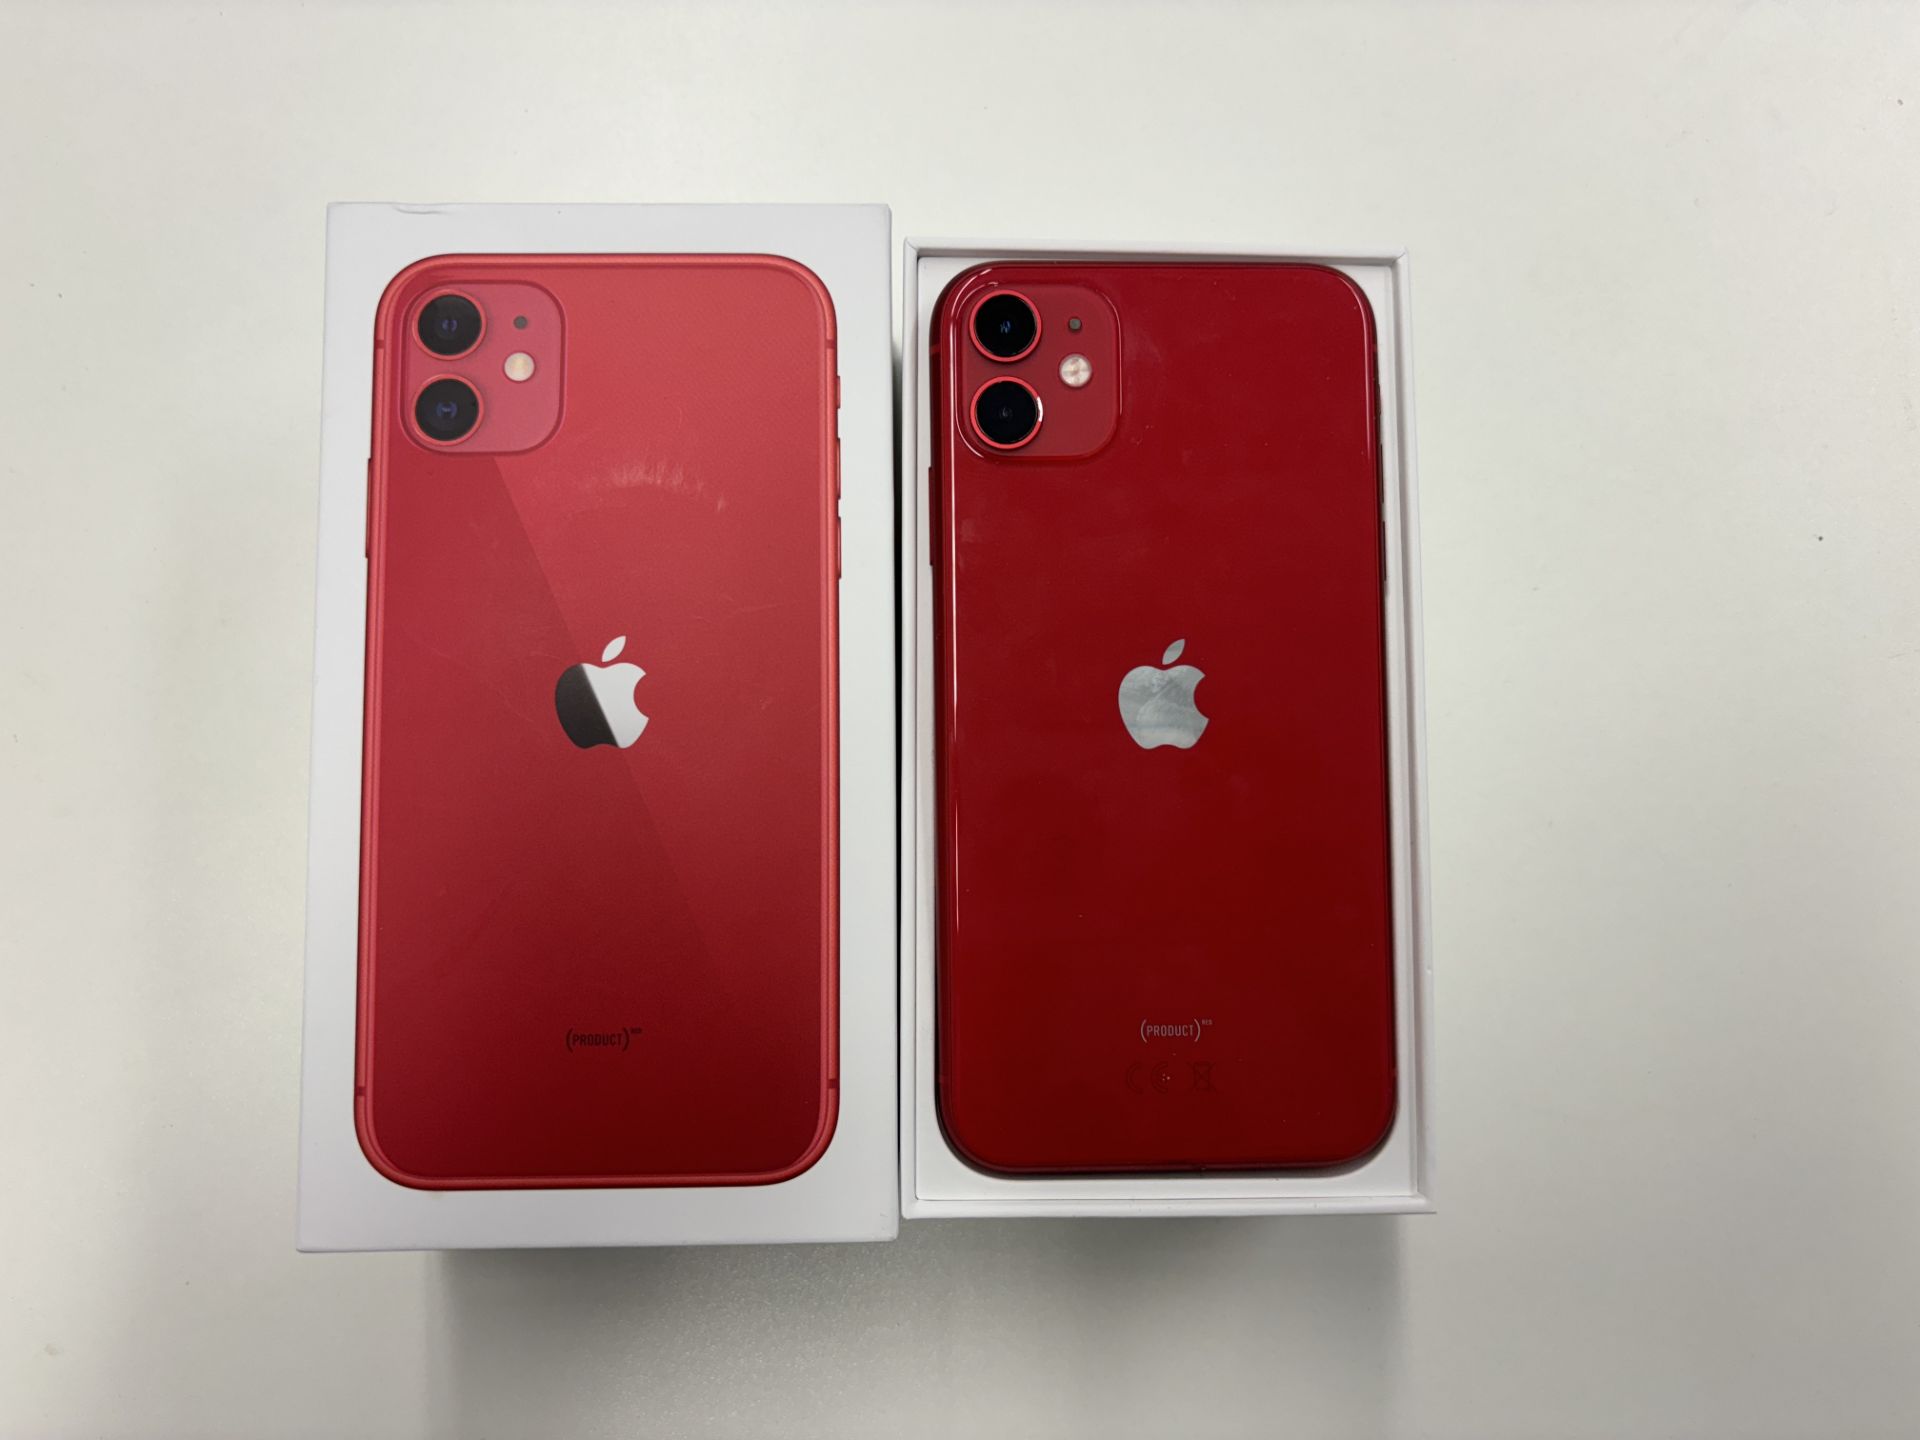 Apple iPhone 11, 128GB, red, model A2221, comes with original box with unused headphones, charger - Bild 2 aus 8